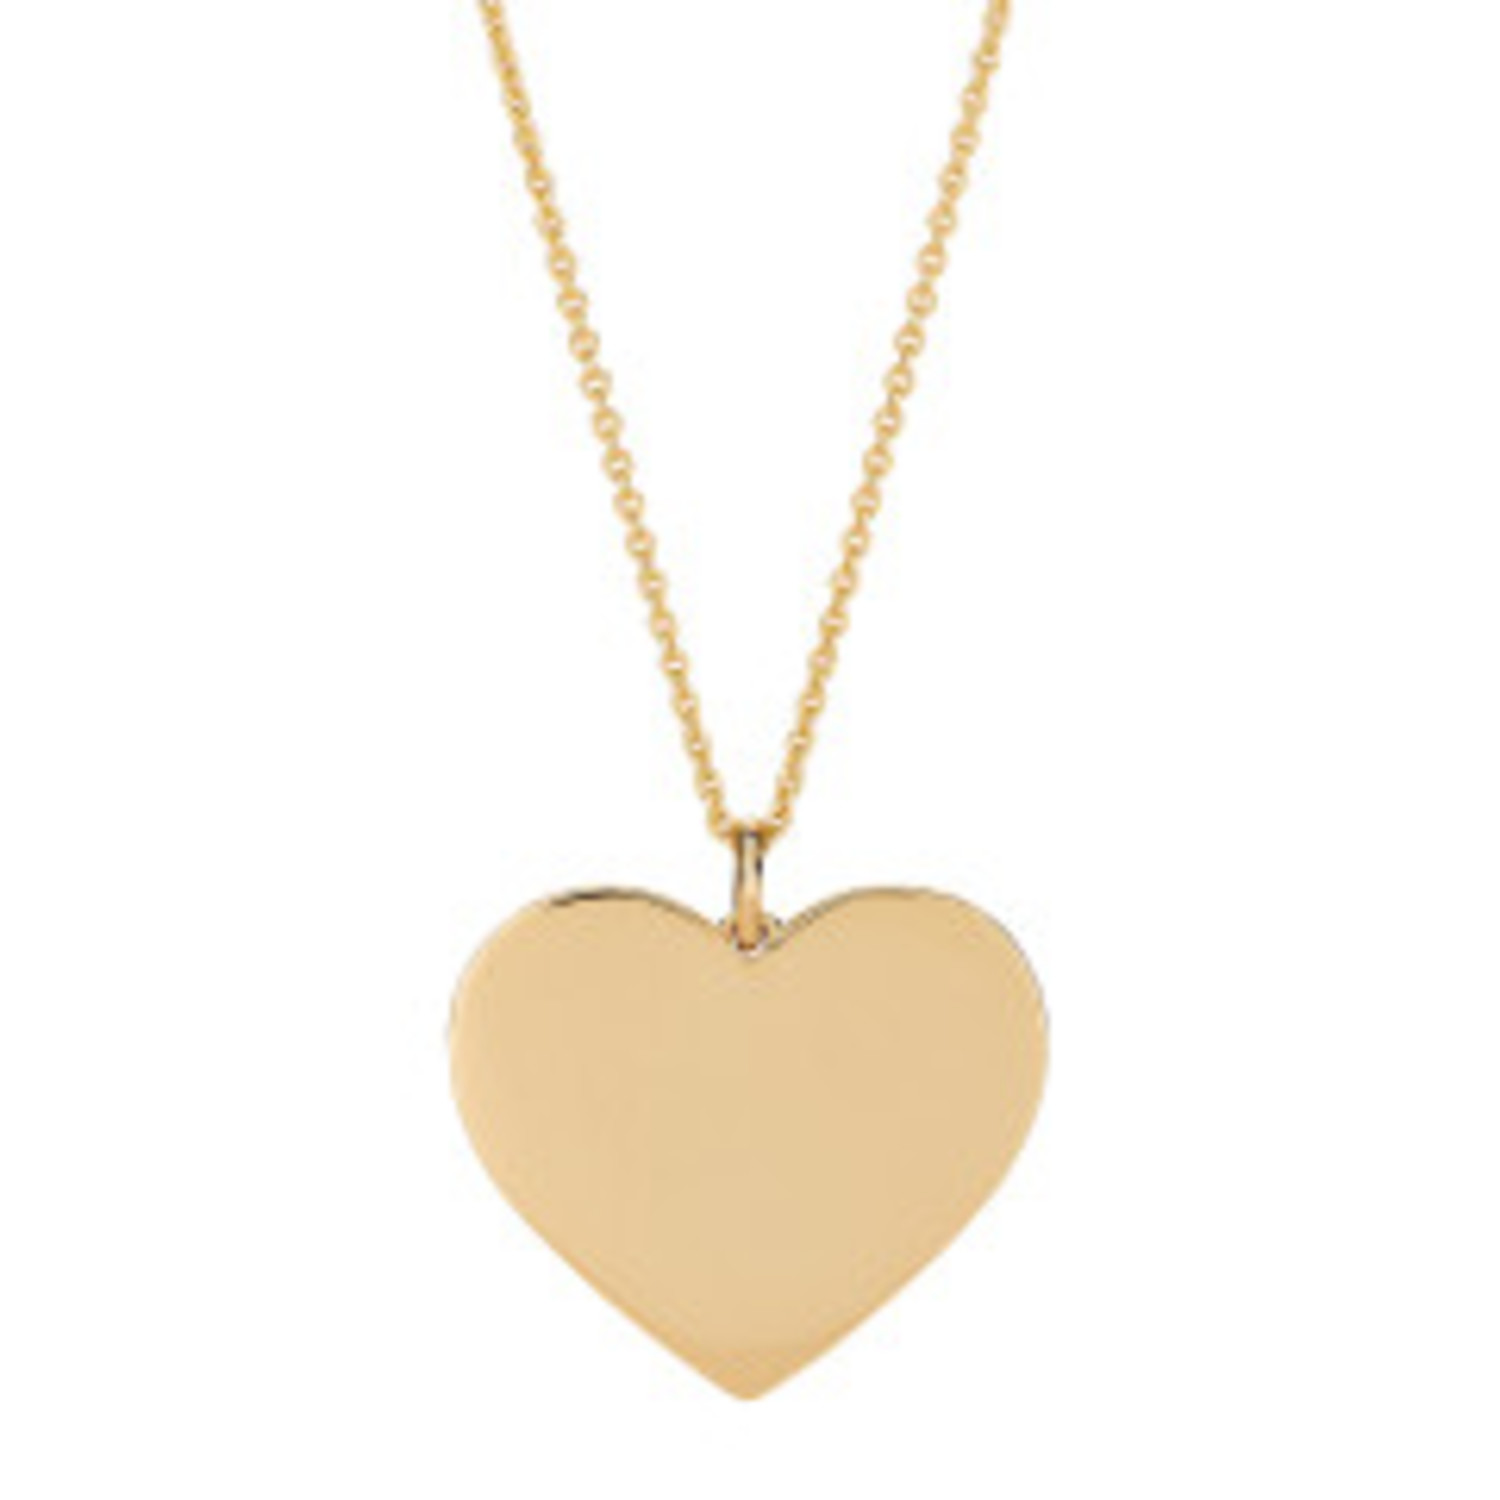 HEART OF GOLD ENGRAVABLE CHARM